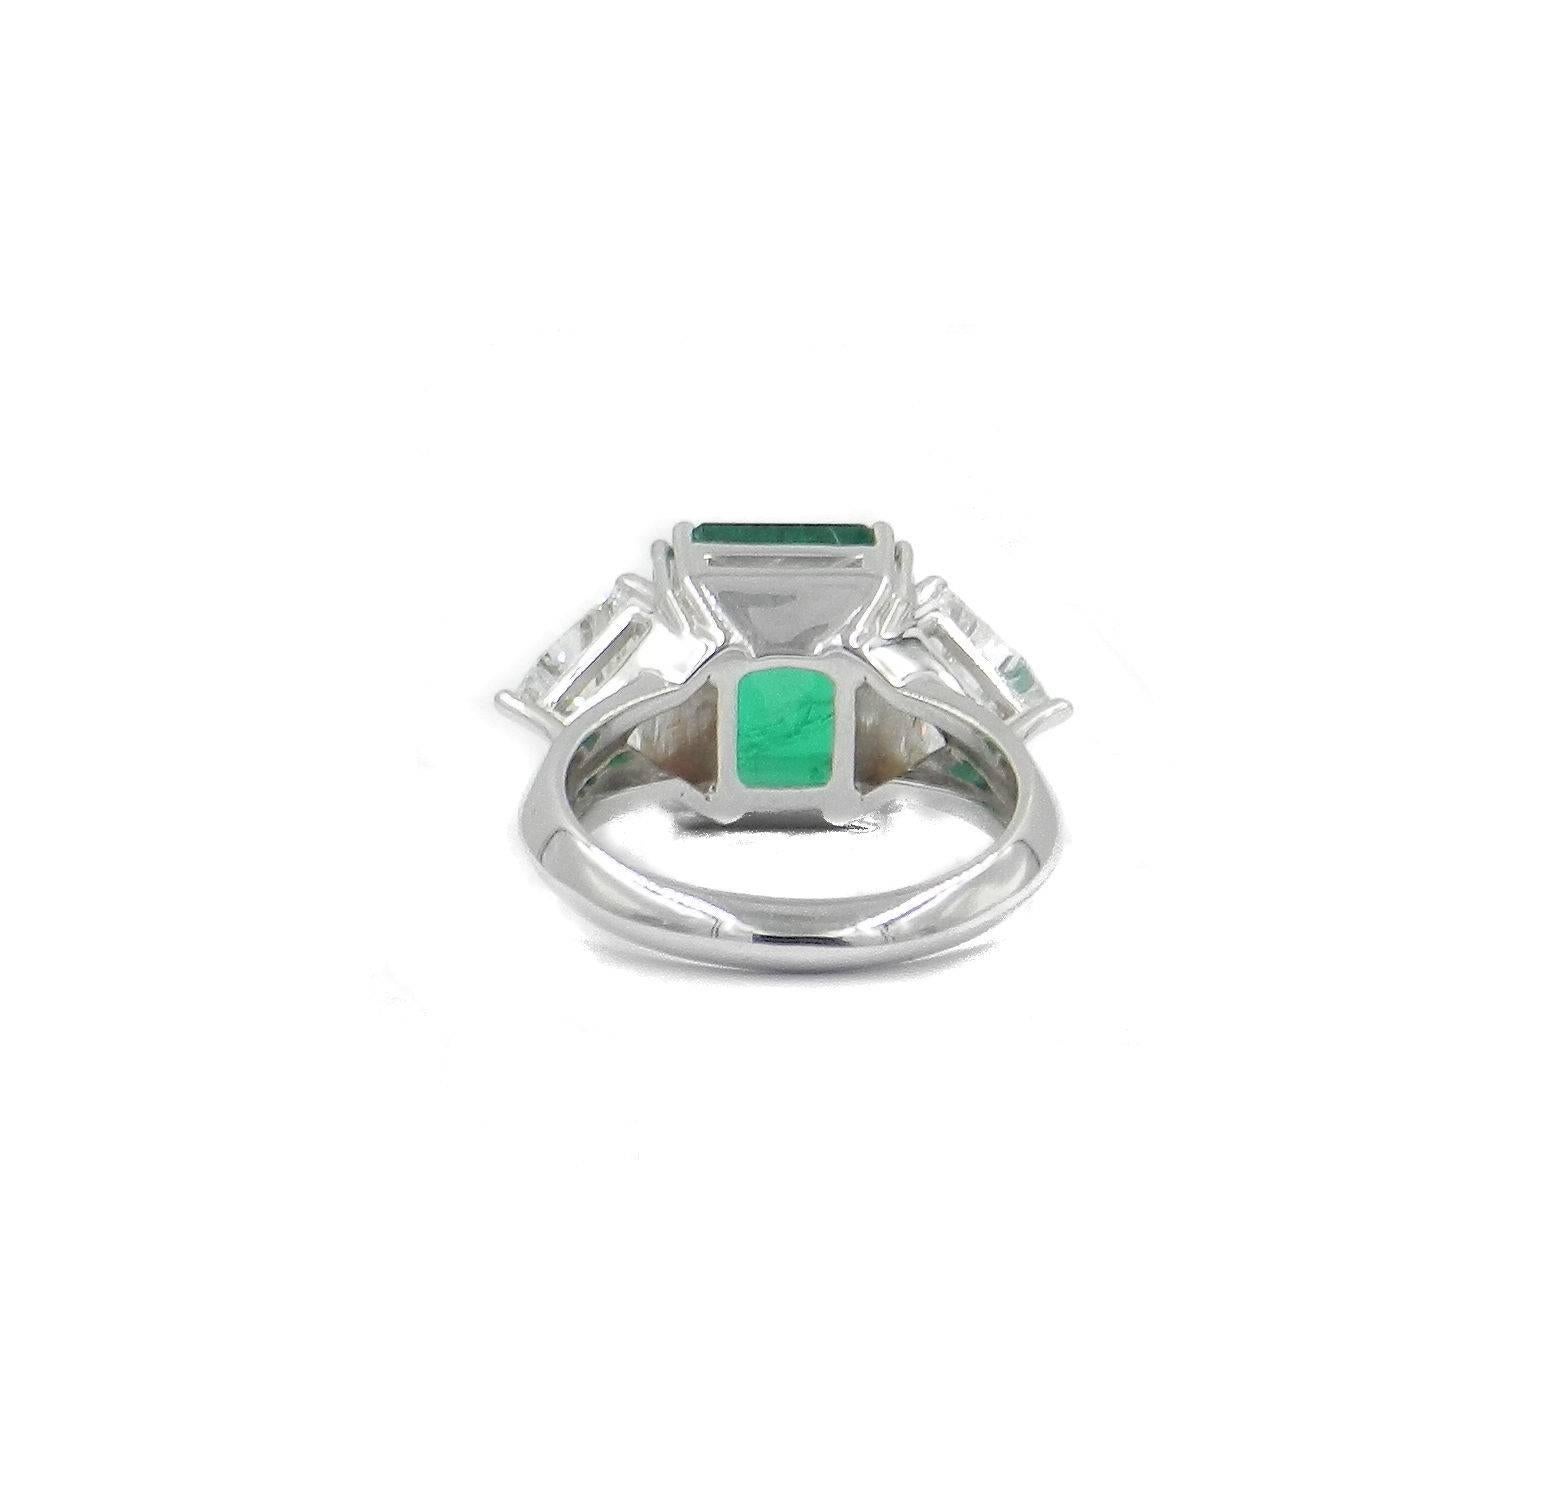 Natural green colombian emerald octagonal shape weight carat 5.48 with Gubelin certificate. Two triangular white diamonds total carat weight 1.65
These three beautiful stones have been set in a classic shape ring in 18kt white gold. Surely a